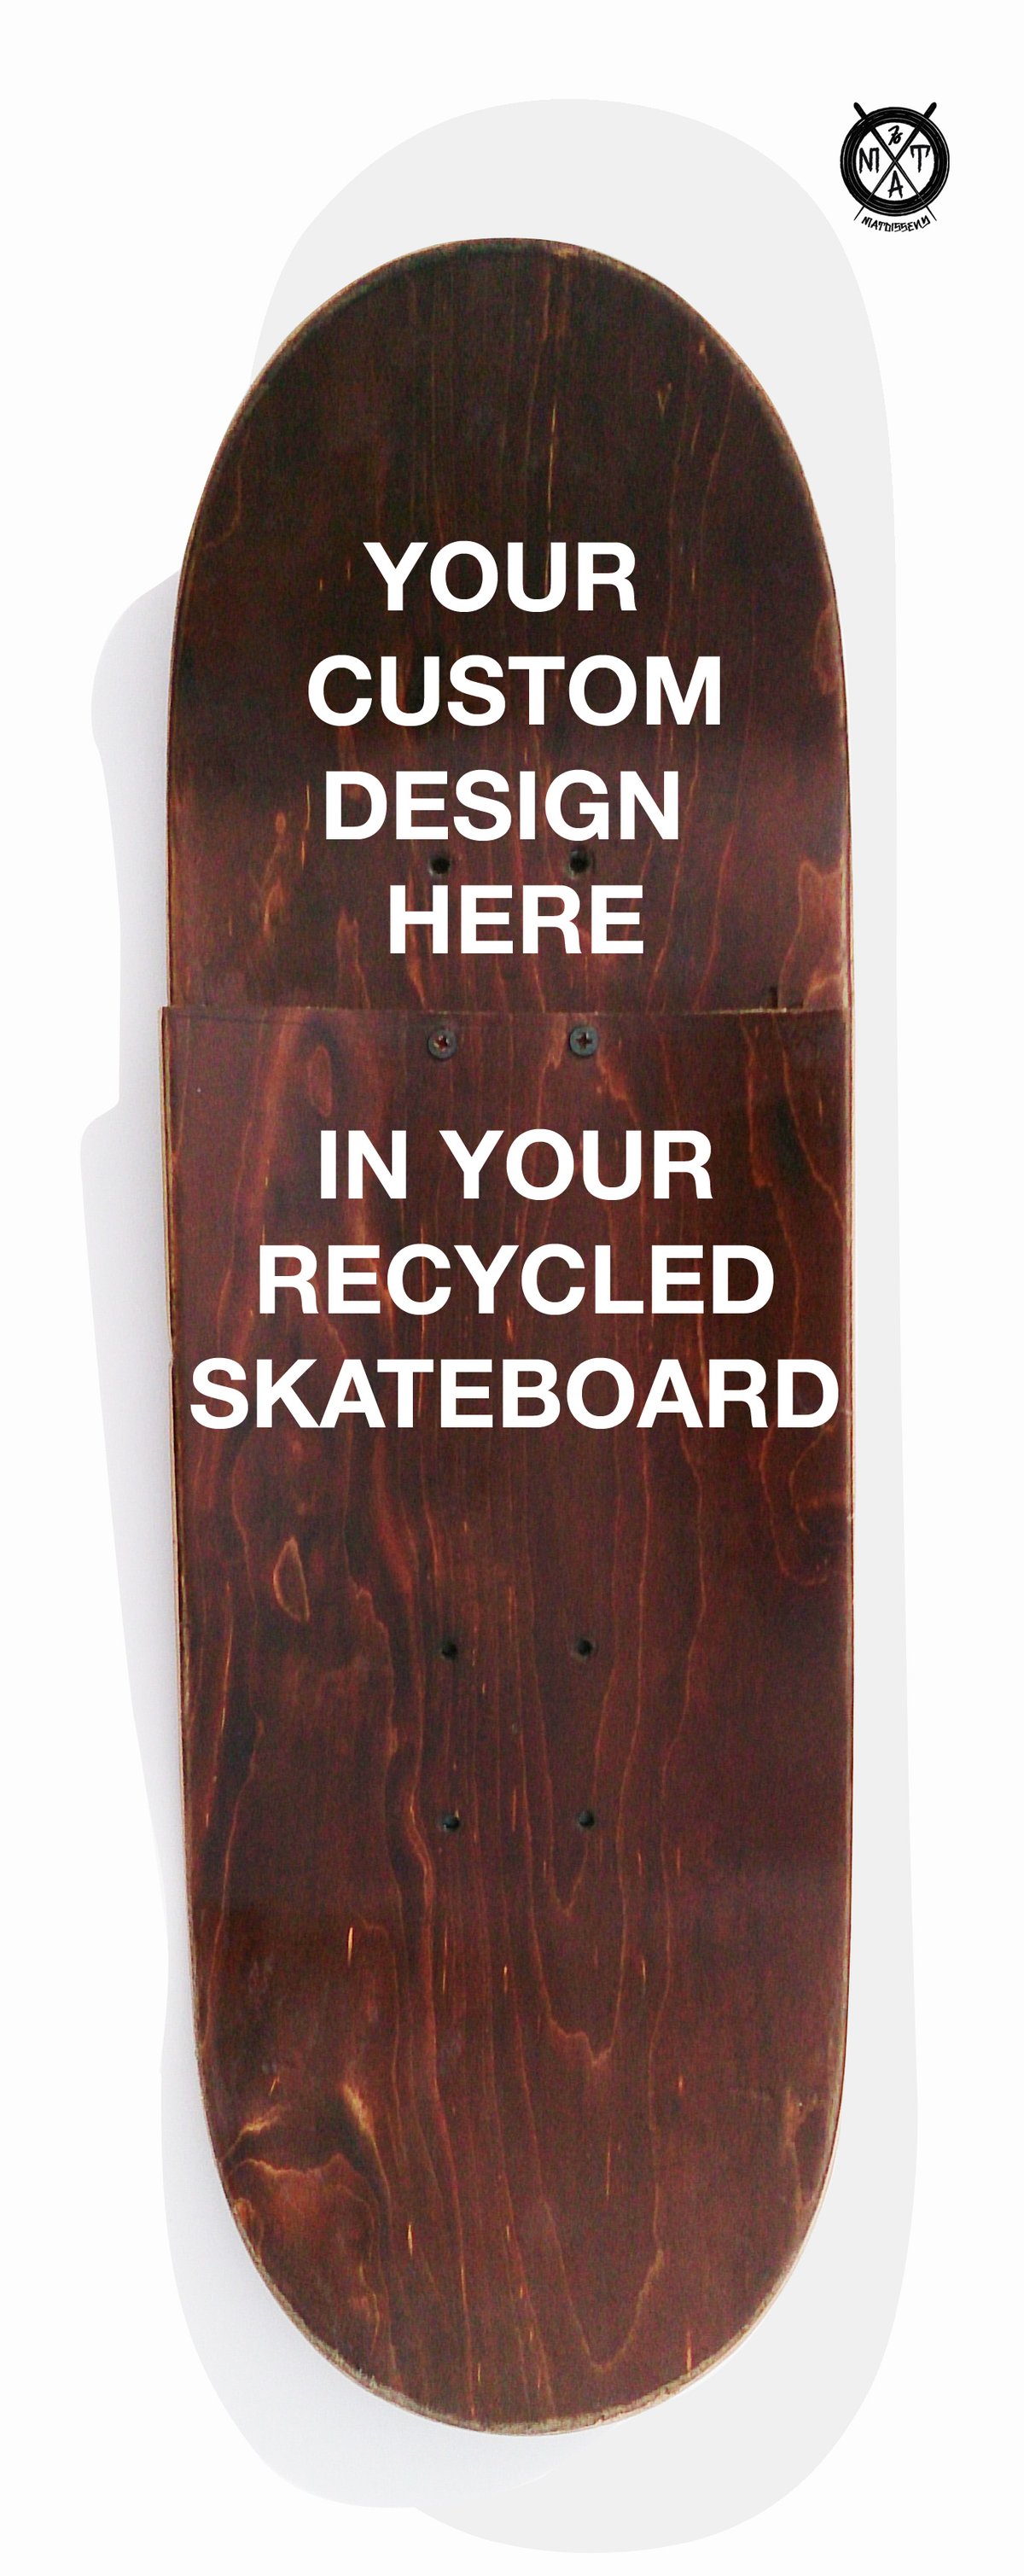 Image of Skate Art (Commision Artwork in your recycled Skateboard) by @matdisseny